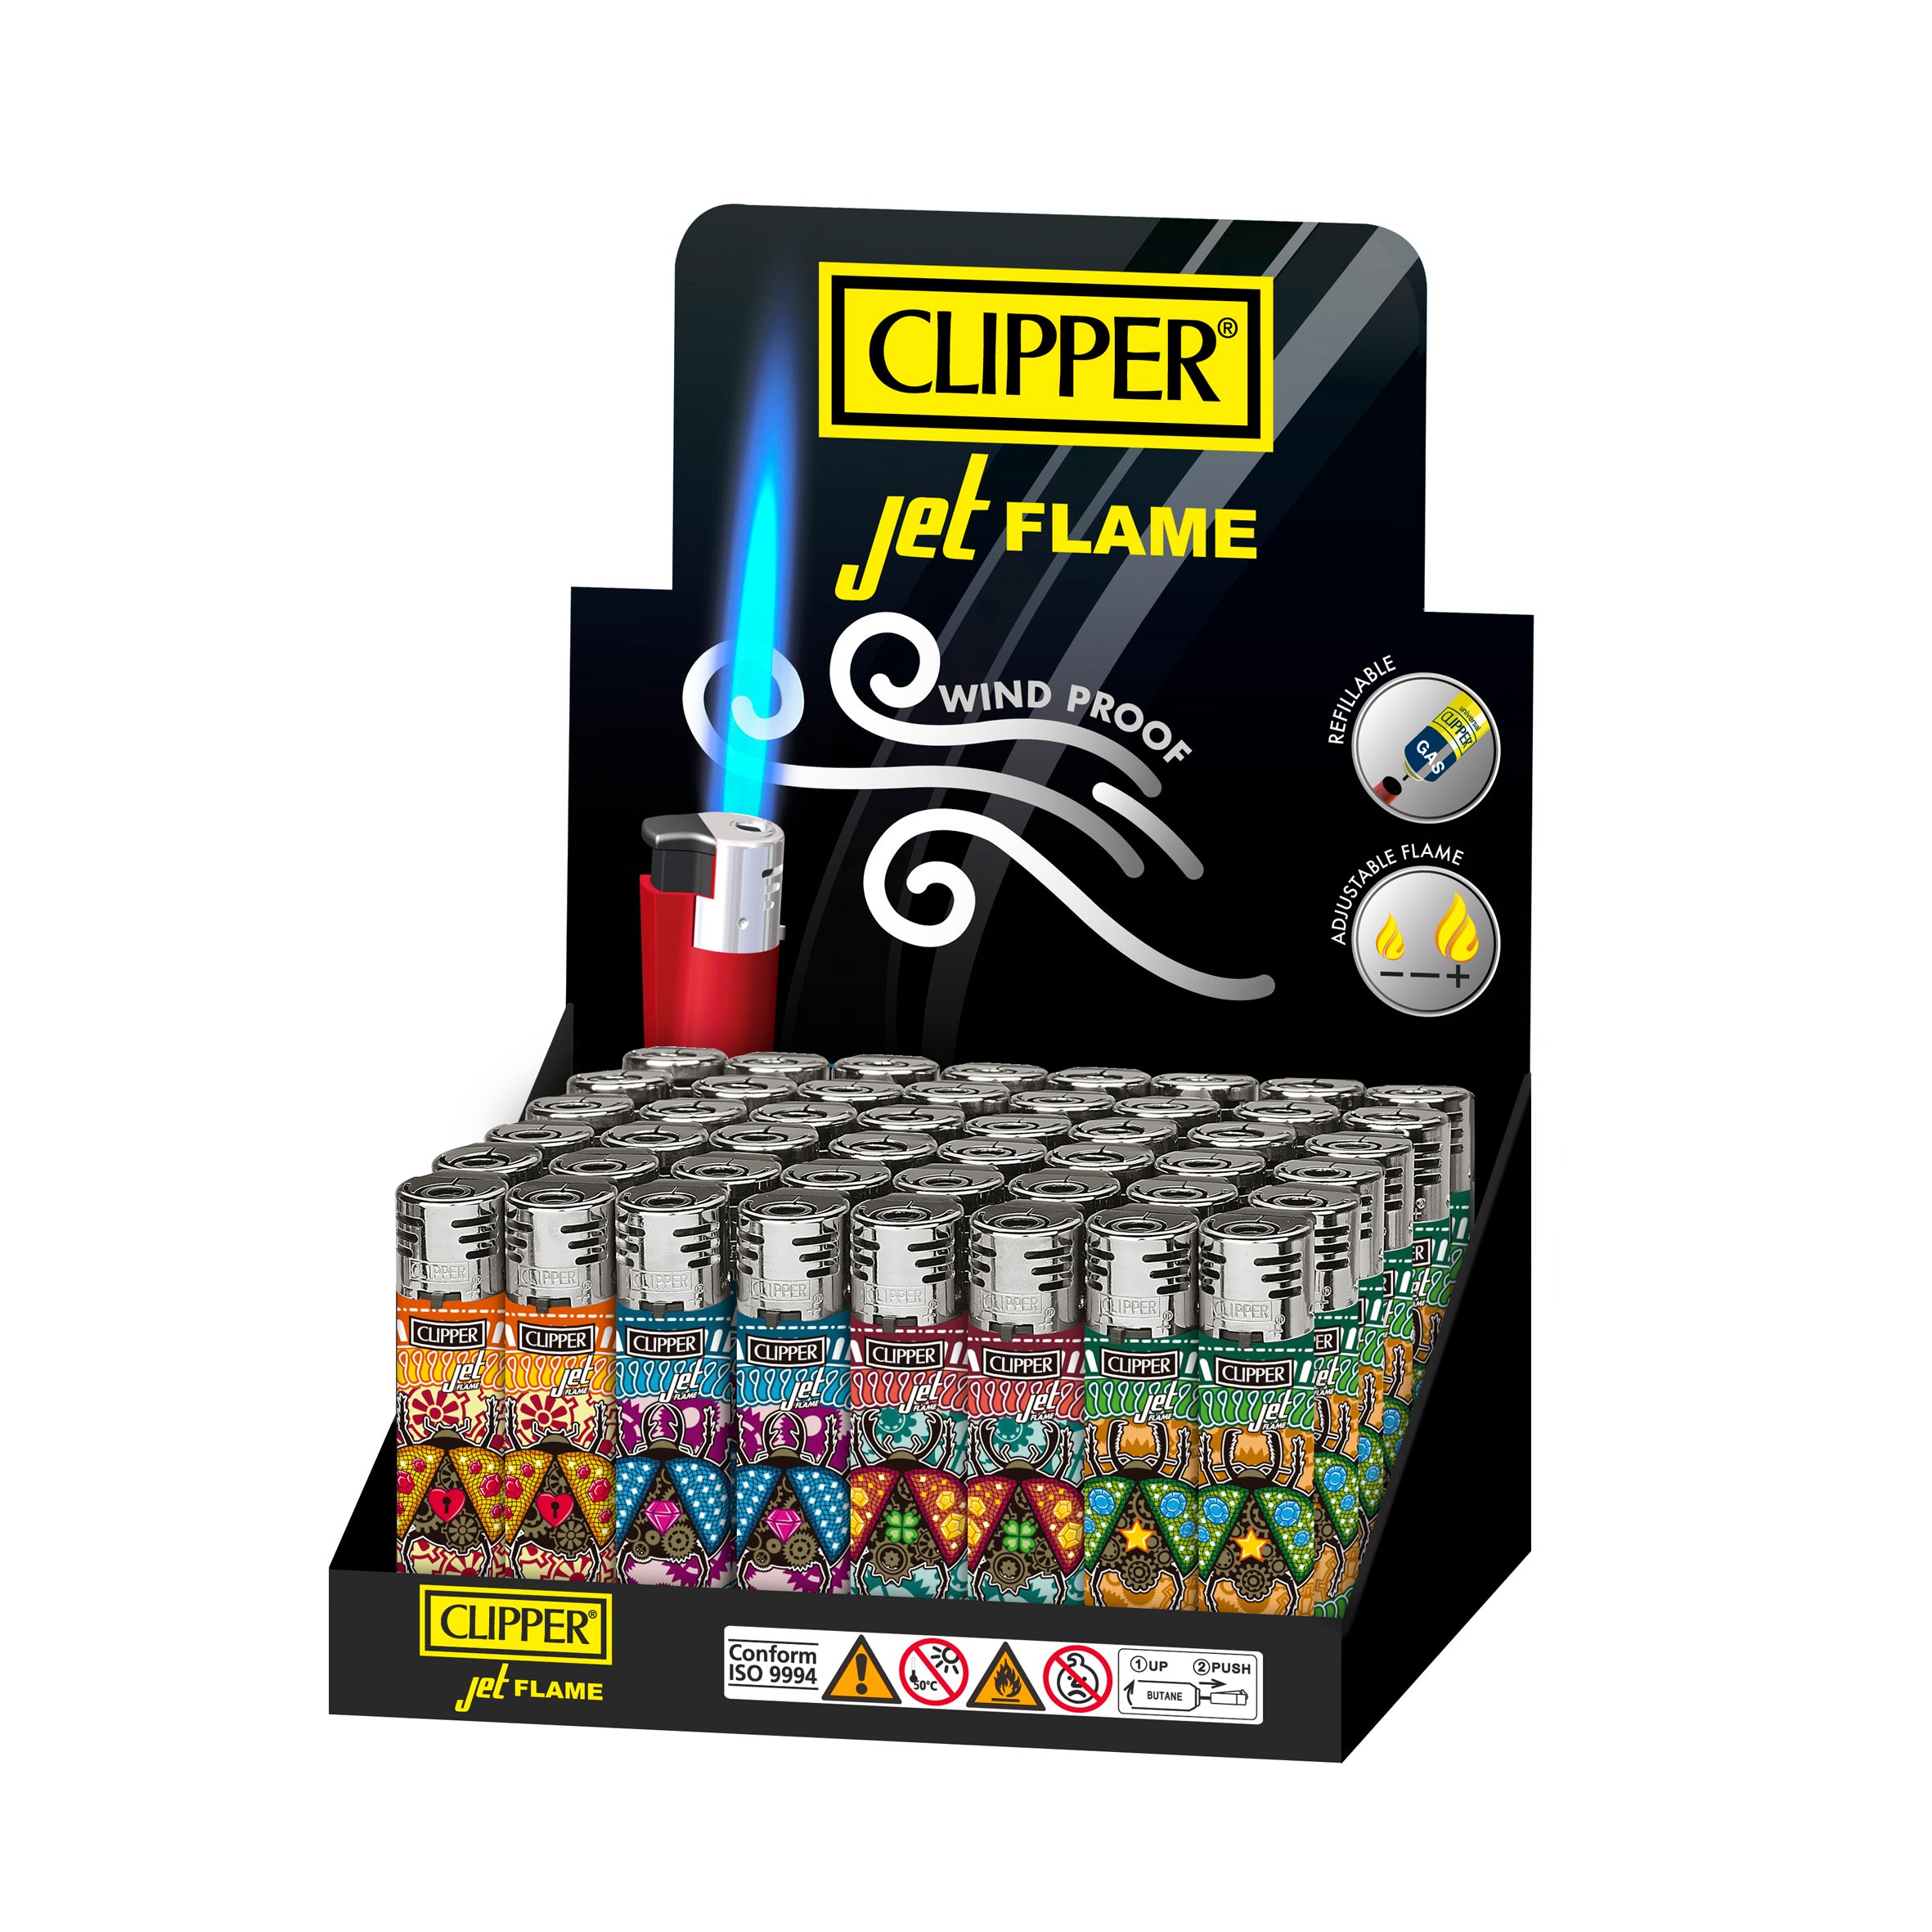 Clipper Classic Large | Jet Flame - SHINY BEETLE